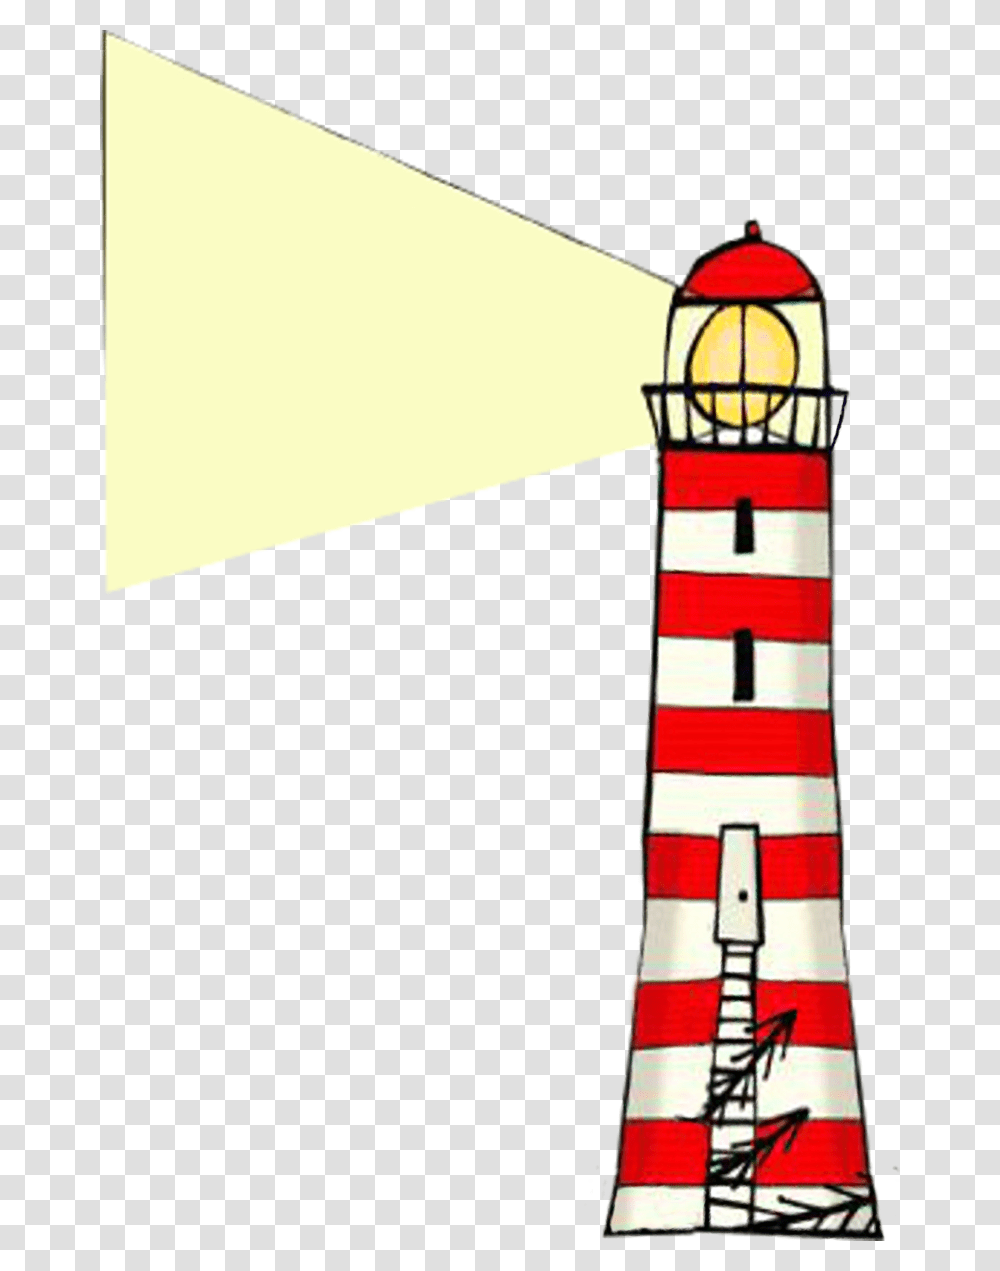 Lighthouse Portable Network Graphics Clip Art Transparency Portable Network Graphics, Architecture, Building, Tower, Beacon Transparent Png